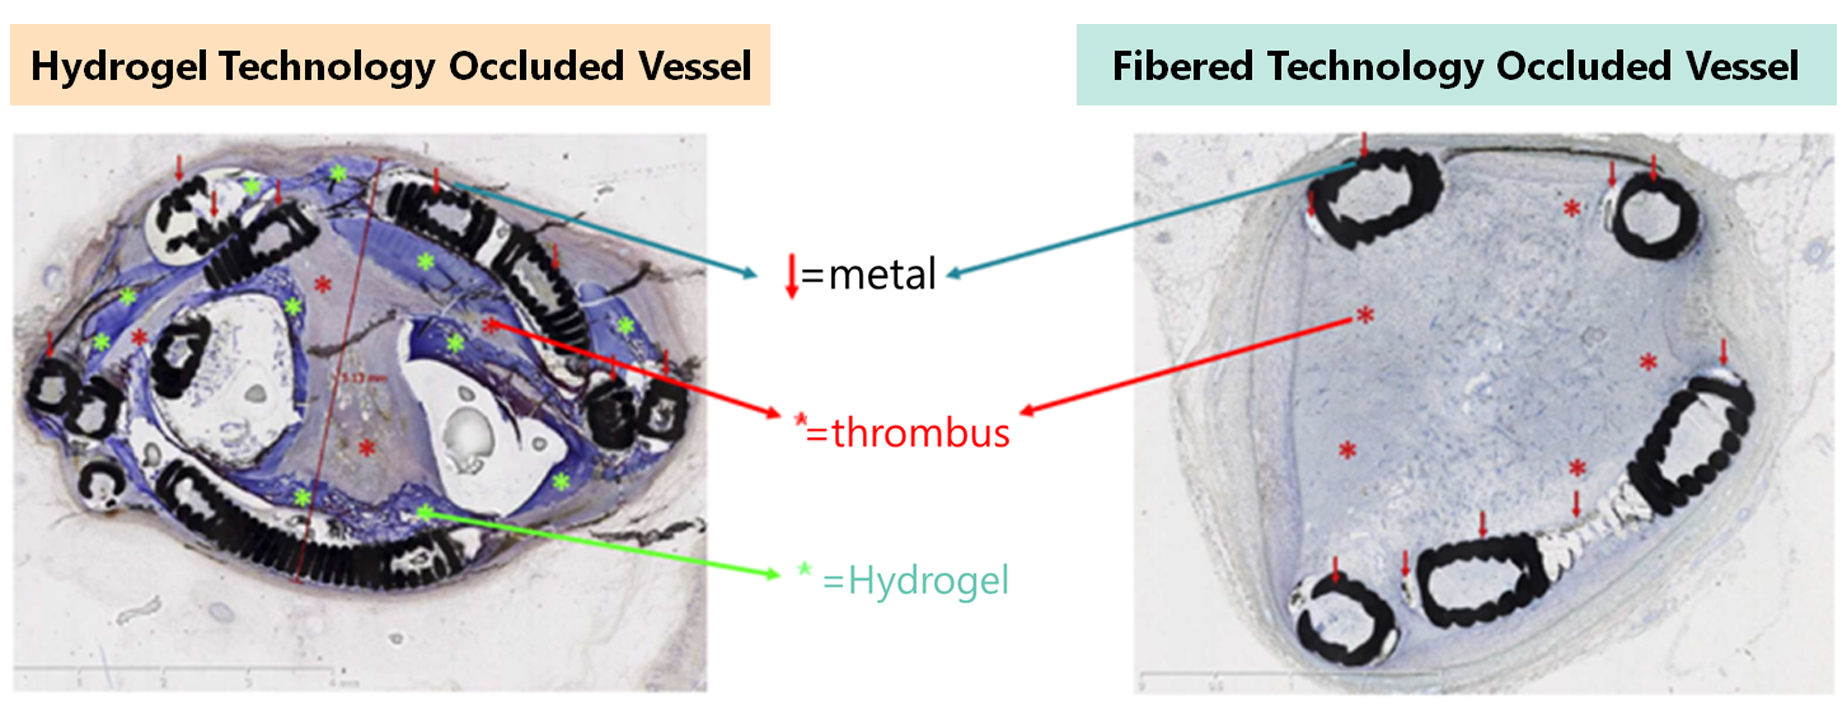 Comparison about Hydrogel and Fiberd Technology occlueded vessel (image)